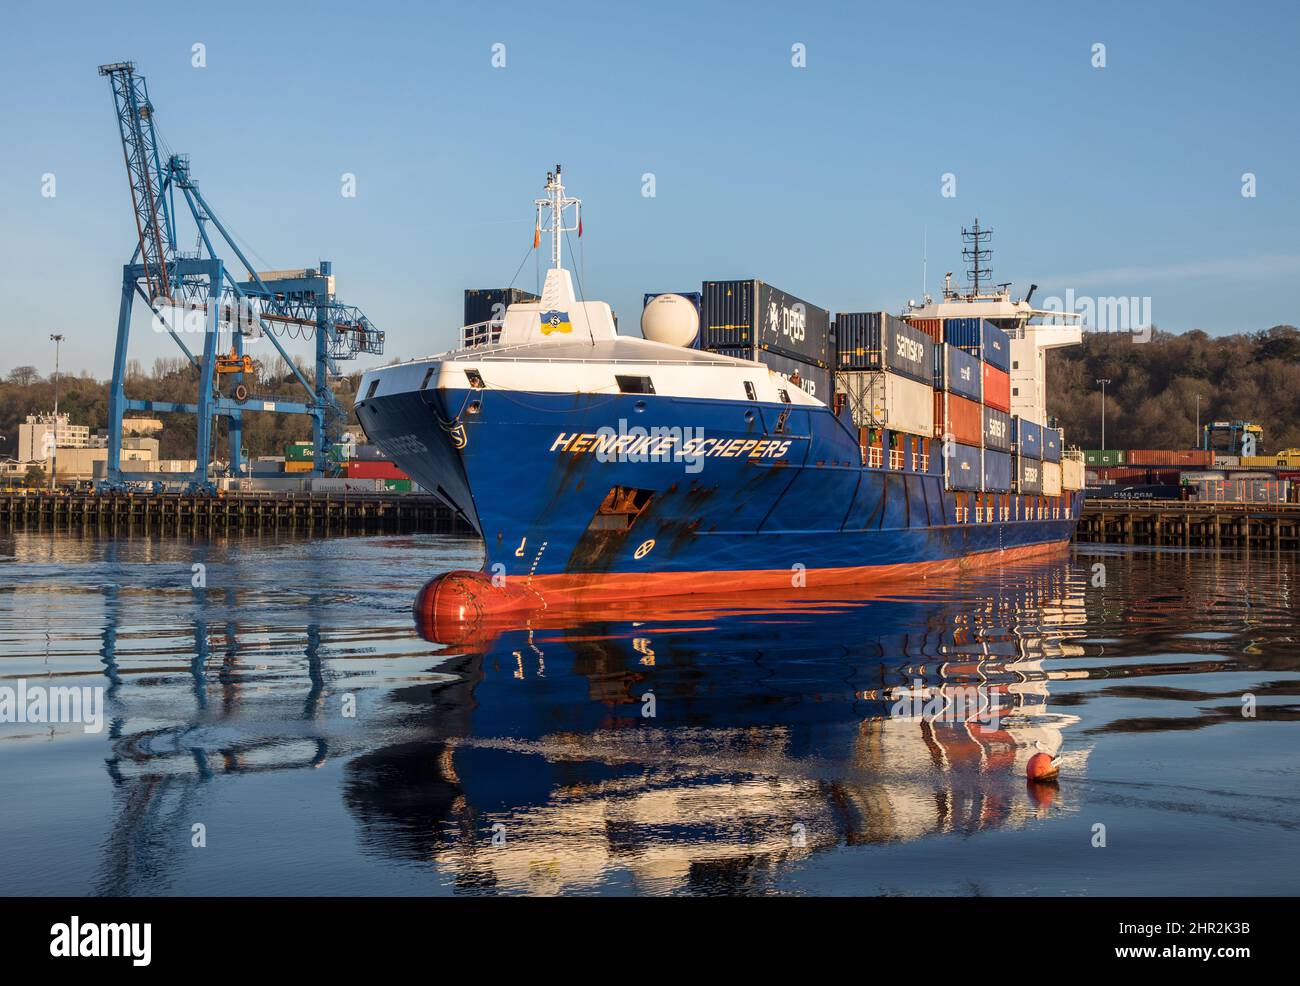 Tivoli, Cork, Ireland. 25th February, 2022. Container vessel Henrike Schepers performs a turning manoeuvre on the River Lee after arriving from Rotterdam with cargo at Tivoli Docks, Cork, Ireland.  - Credit; David Creedon / Alamy Live News Stock Photo